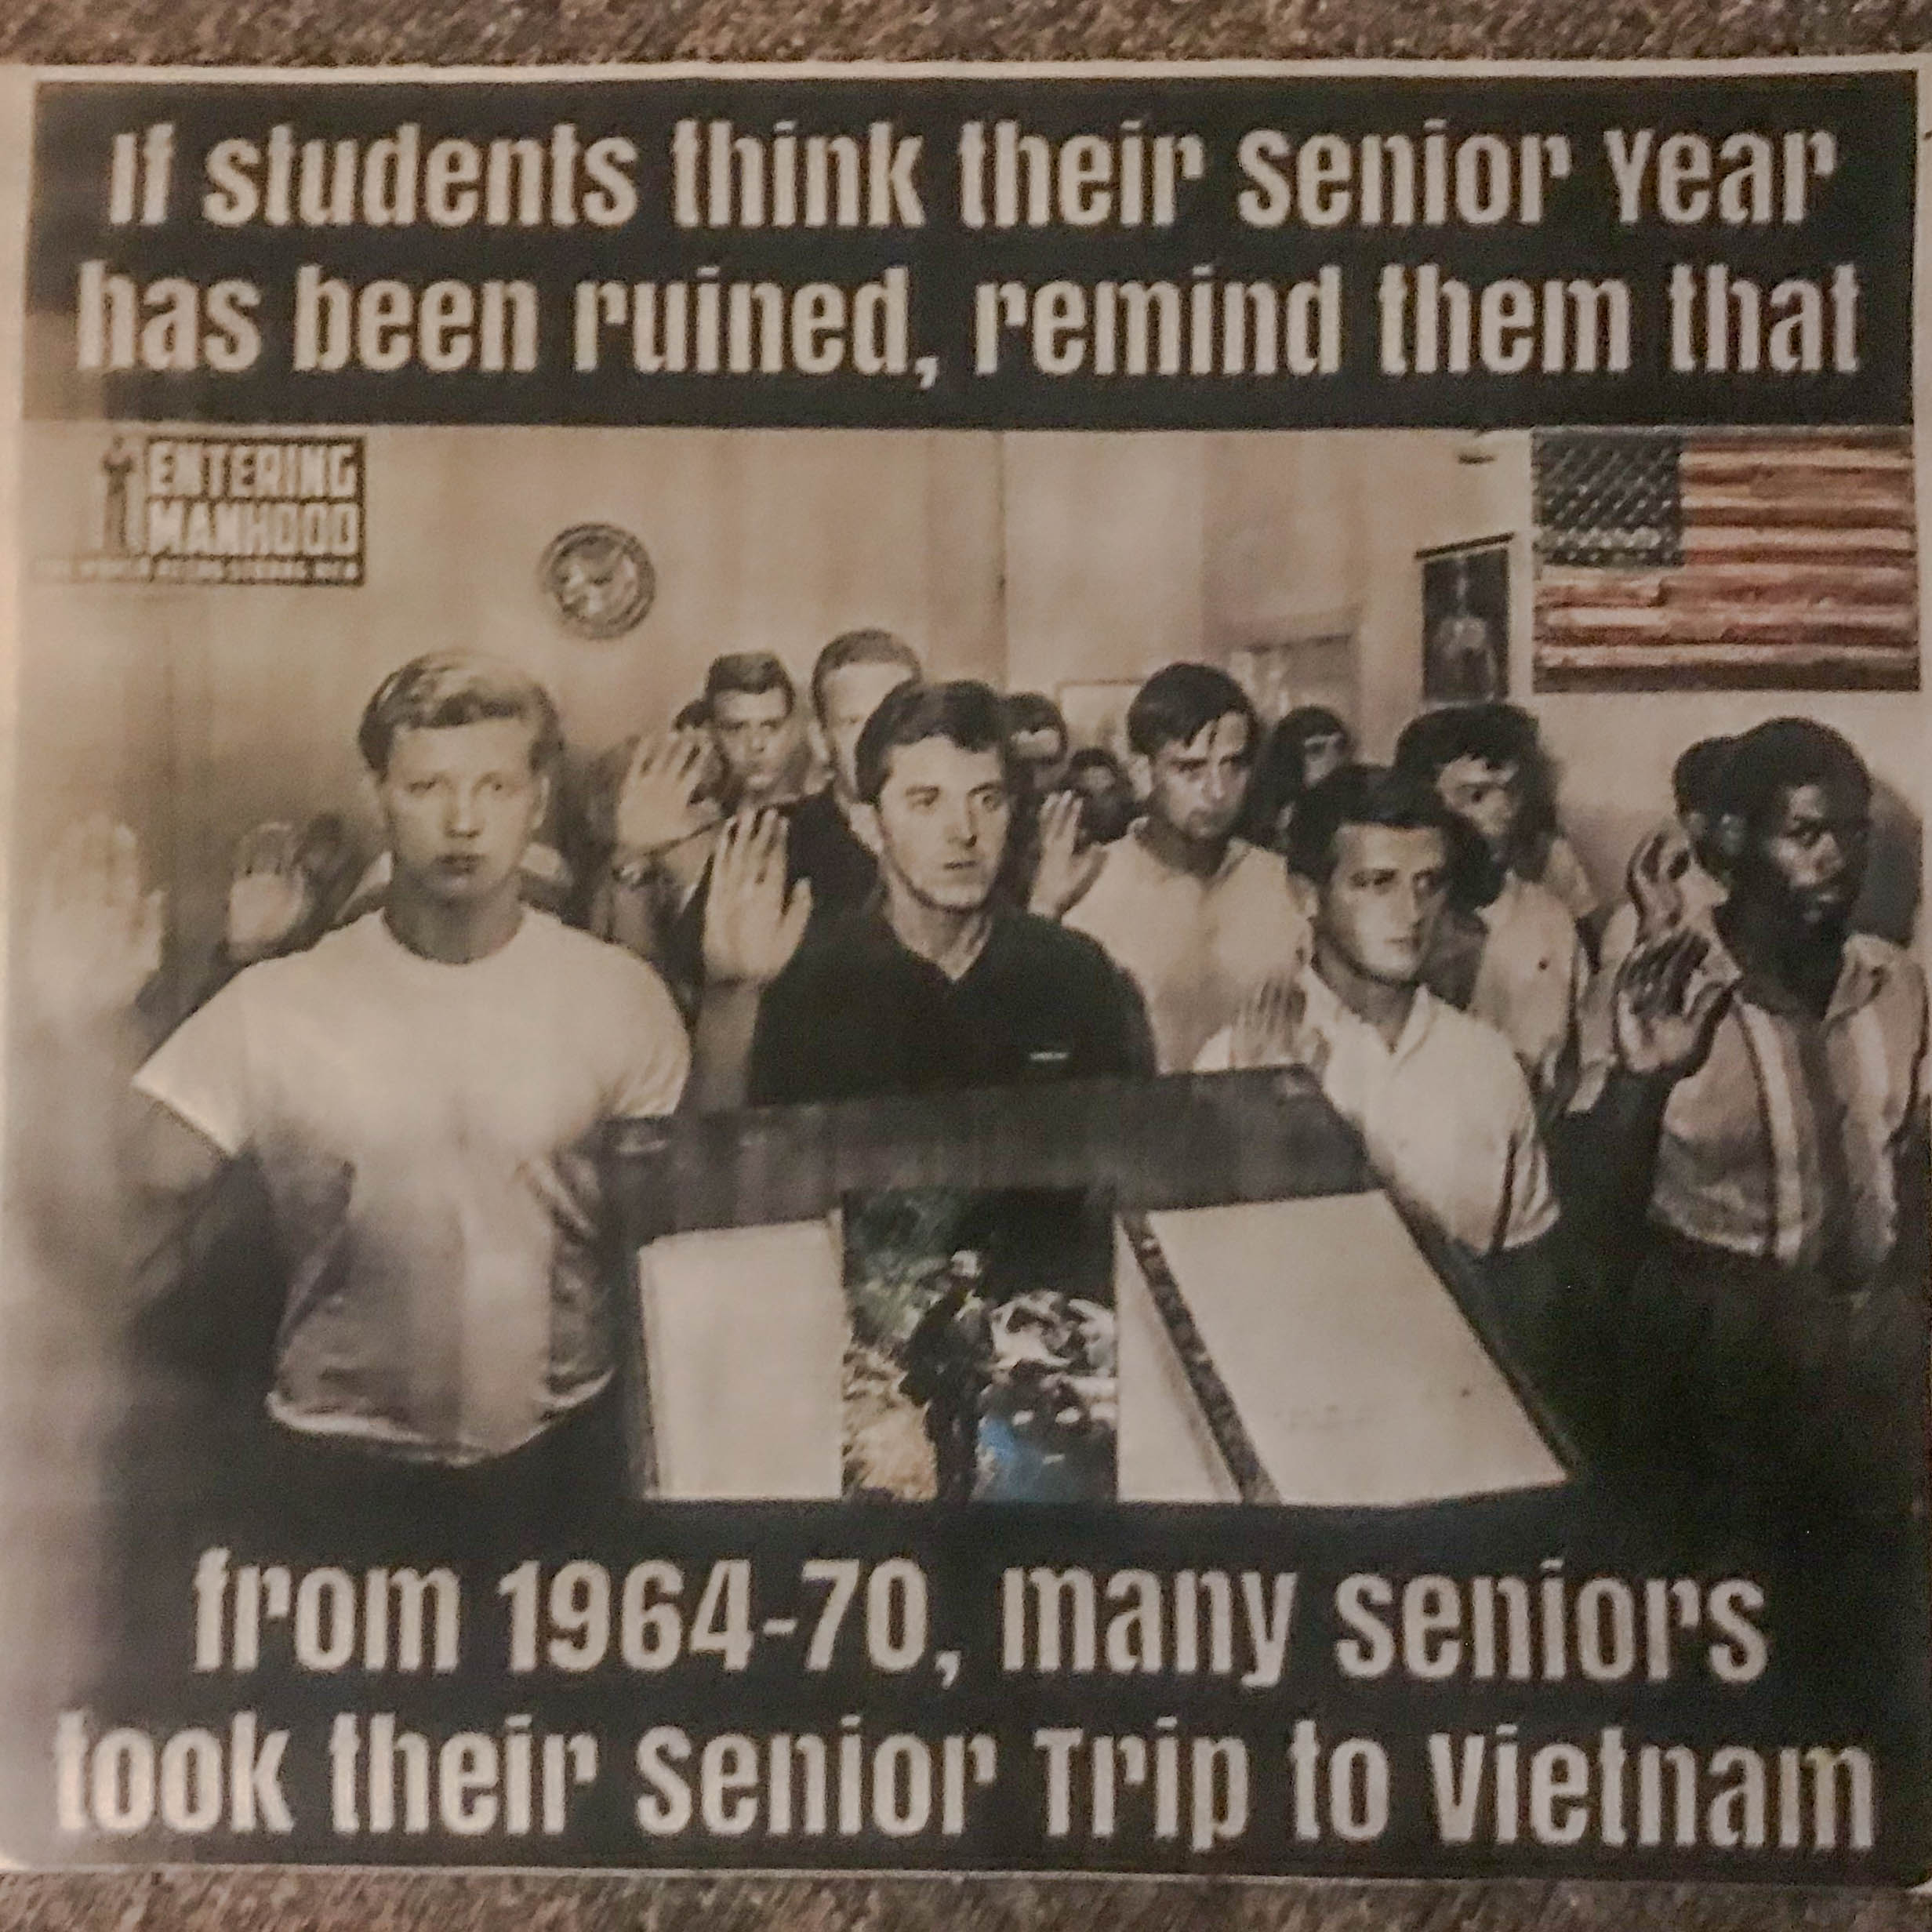 Poster about going to Vietnam in senior year